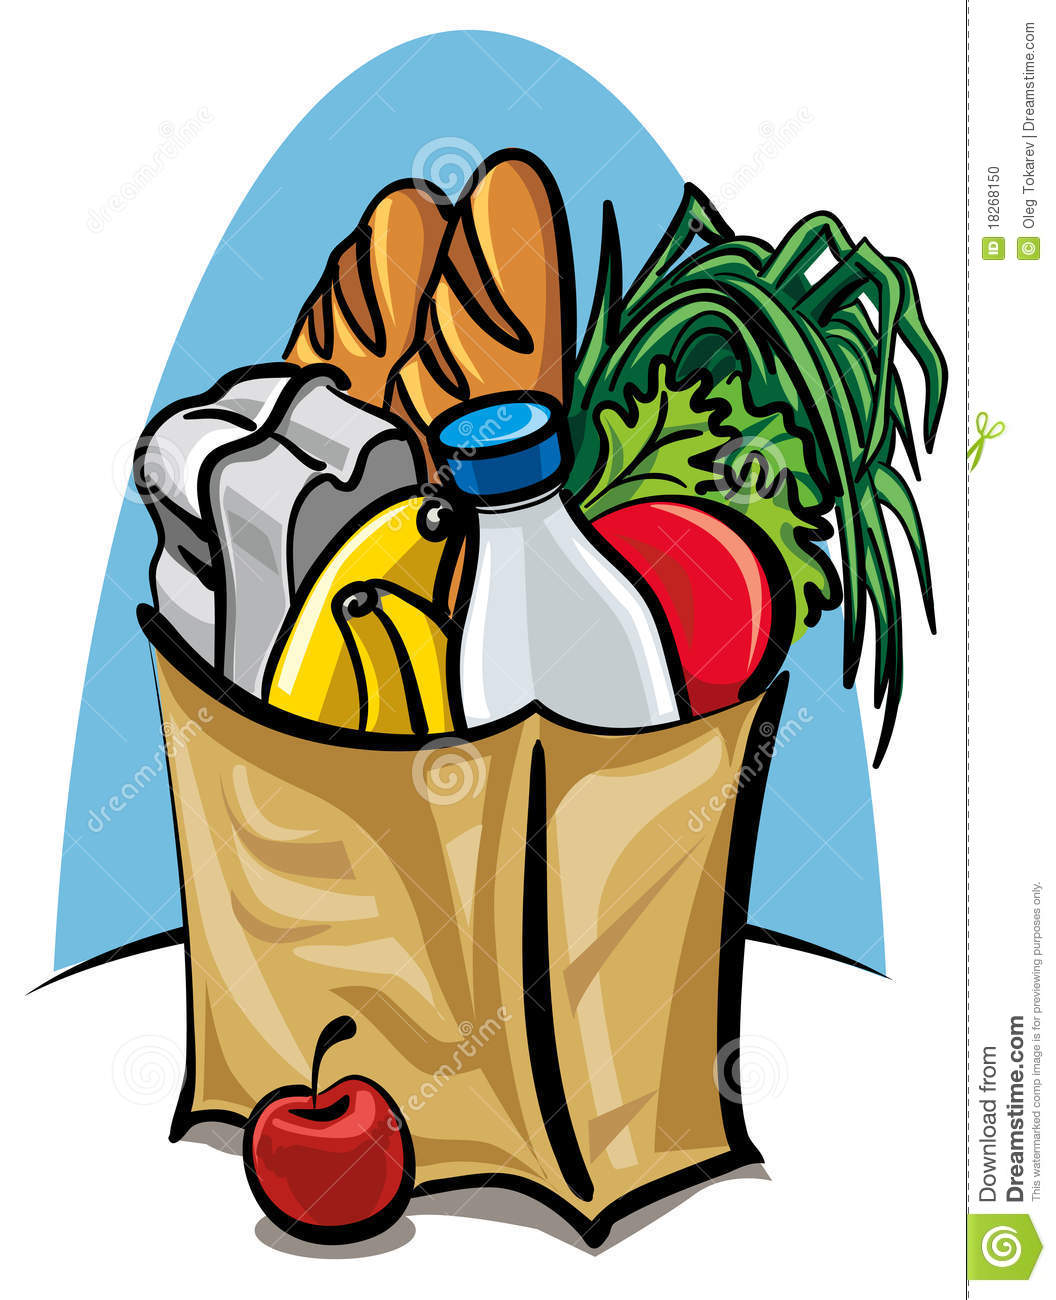 Grocery Bag Clip Art - Groceries Clipart